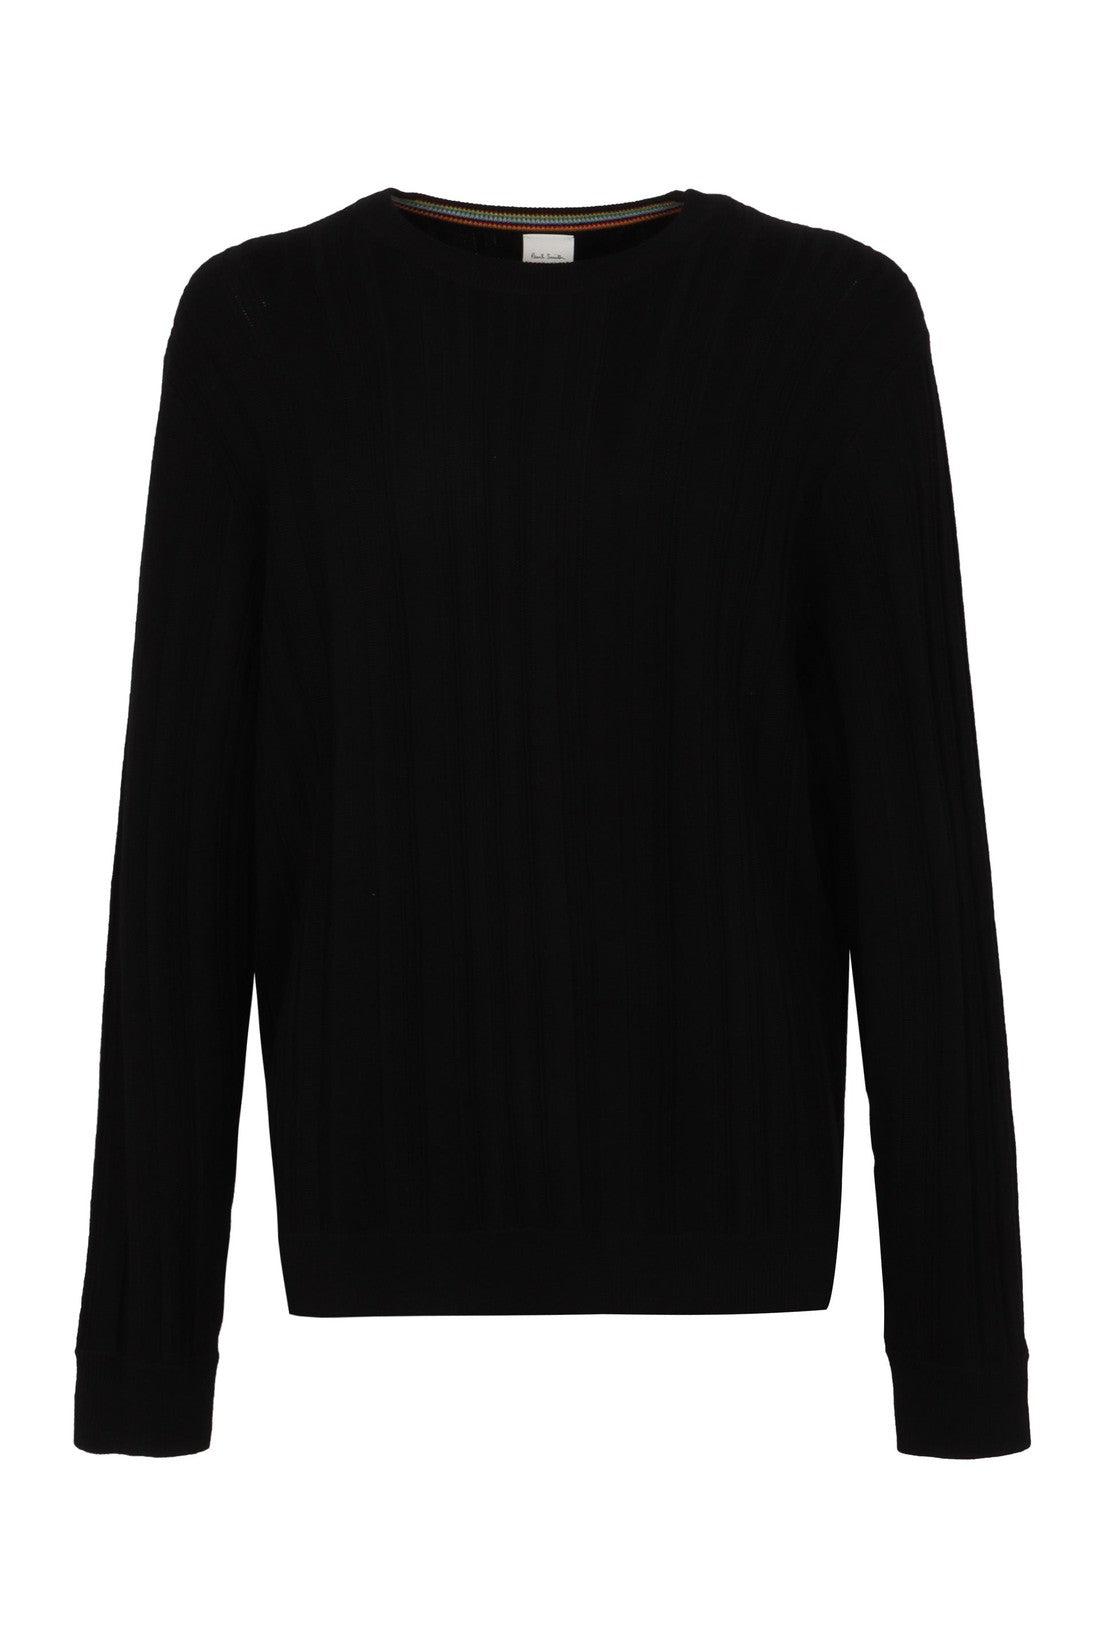 Paul Smith-OUTLET-SALE-Merino wool sweater-ARCHIVIST